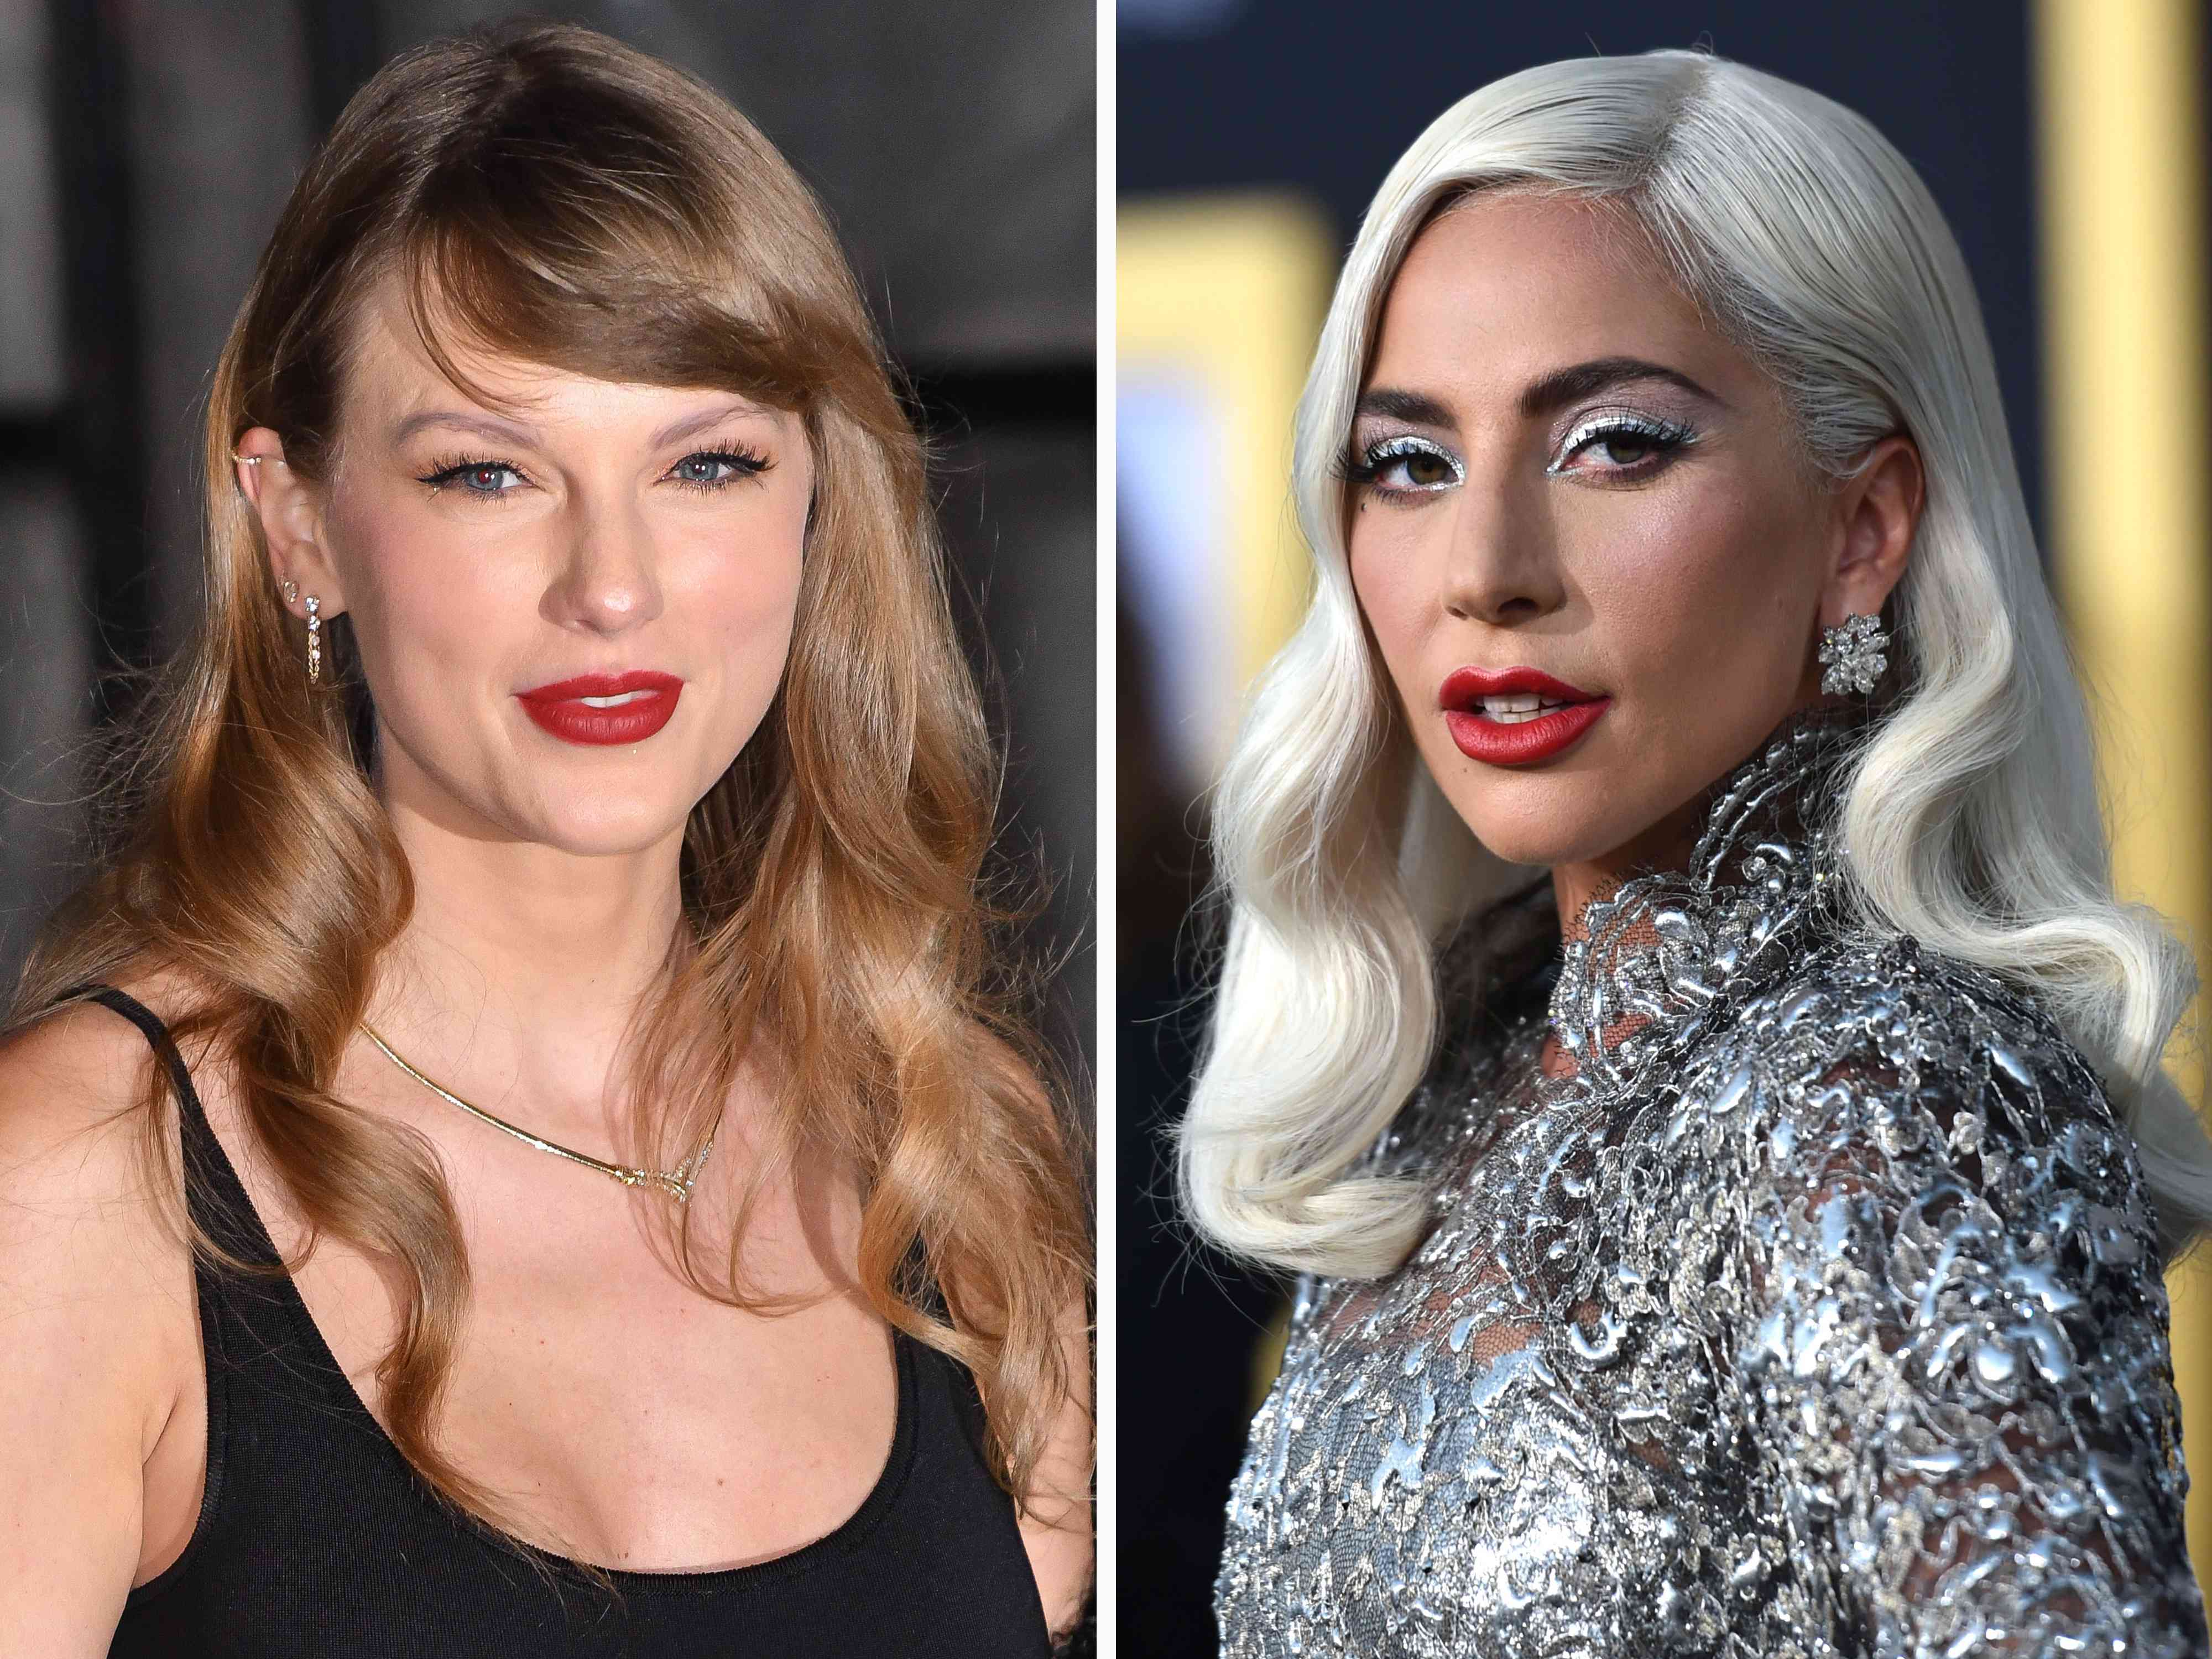 Taylor Swift Came to Lady Gaga's Defense After She Shut Down Pregnancy Rumors